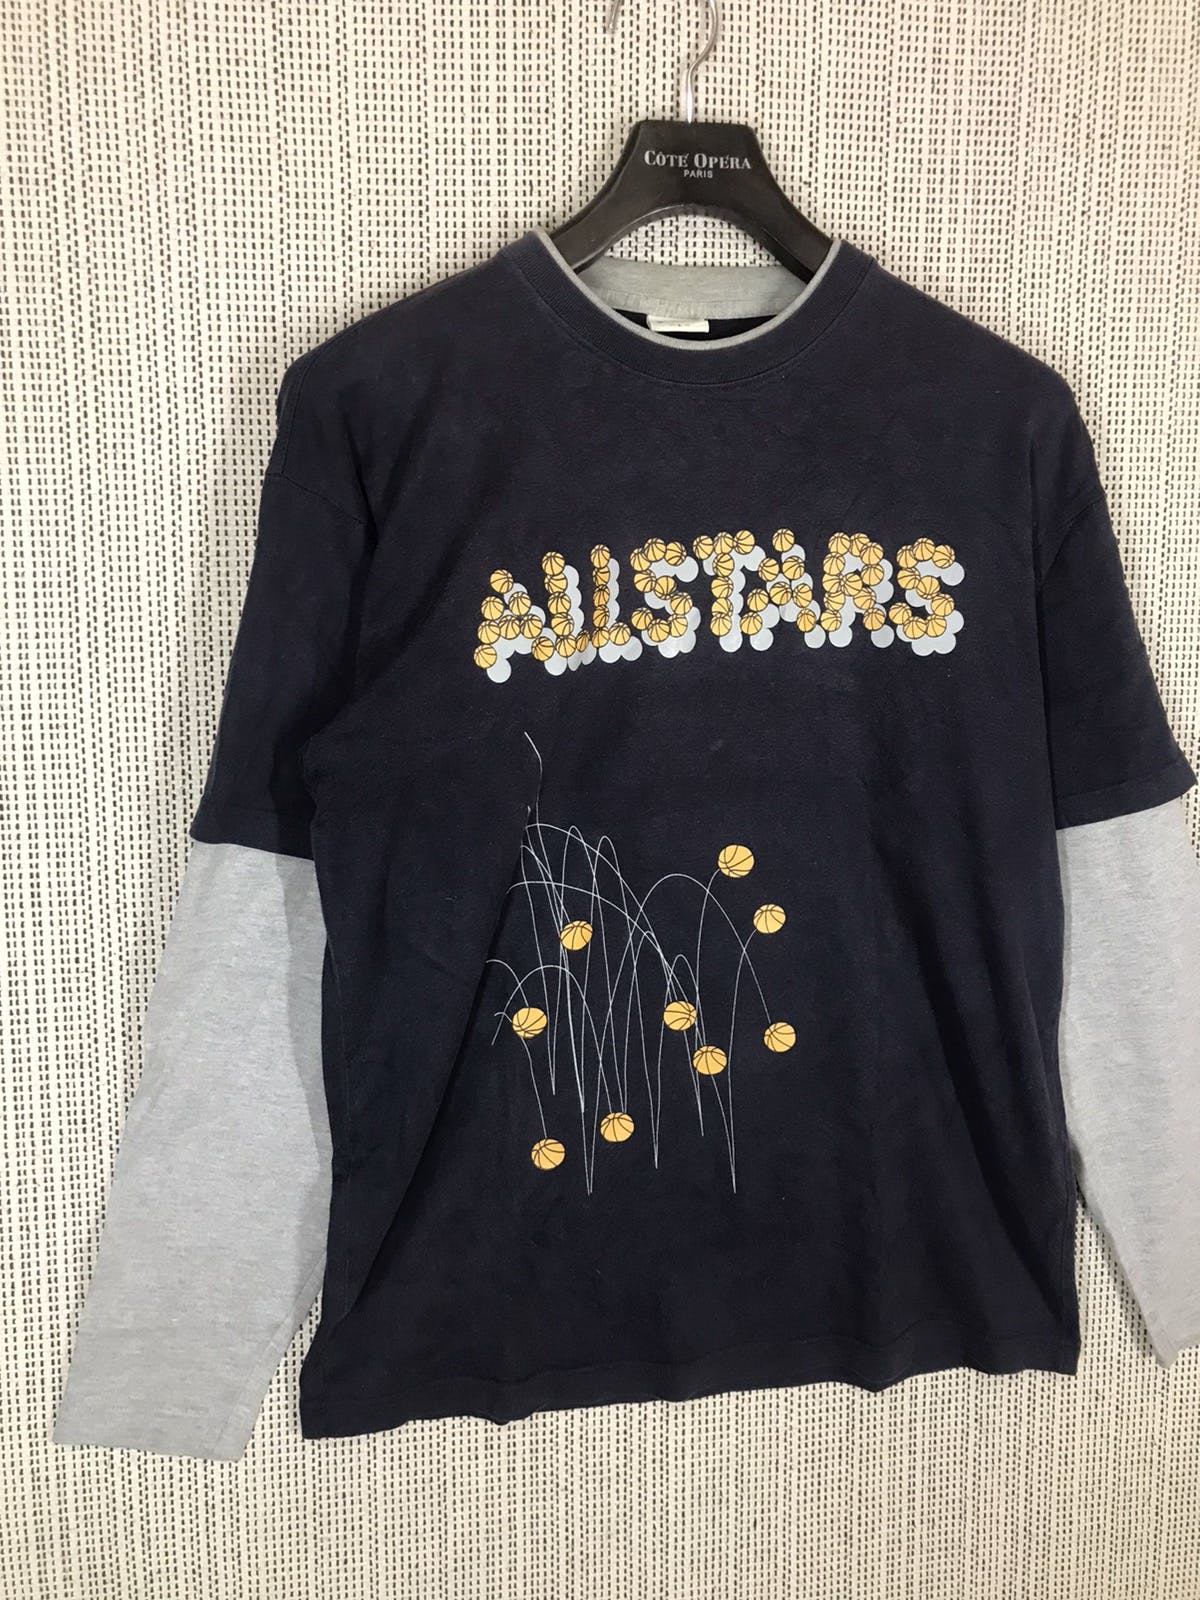 ‼️VINTAGE CONVERSE ALL STAR BASKETBALL DOUBLE SLEEVE‼️ - 2